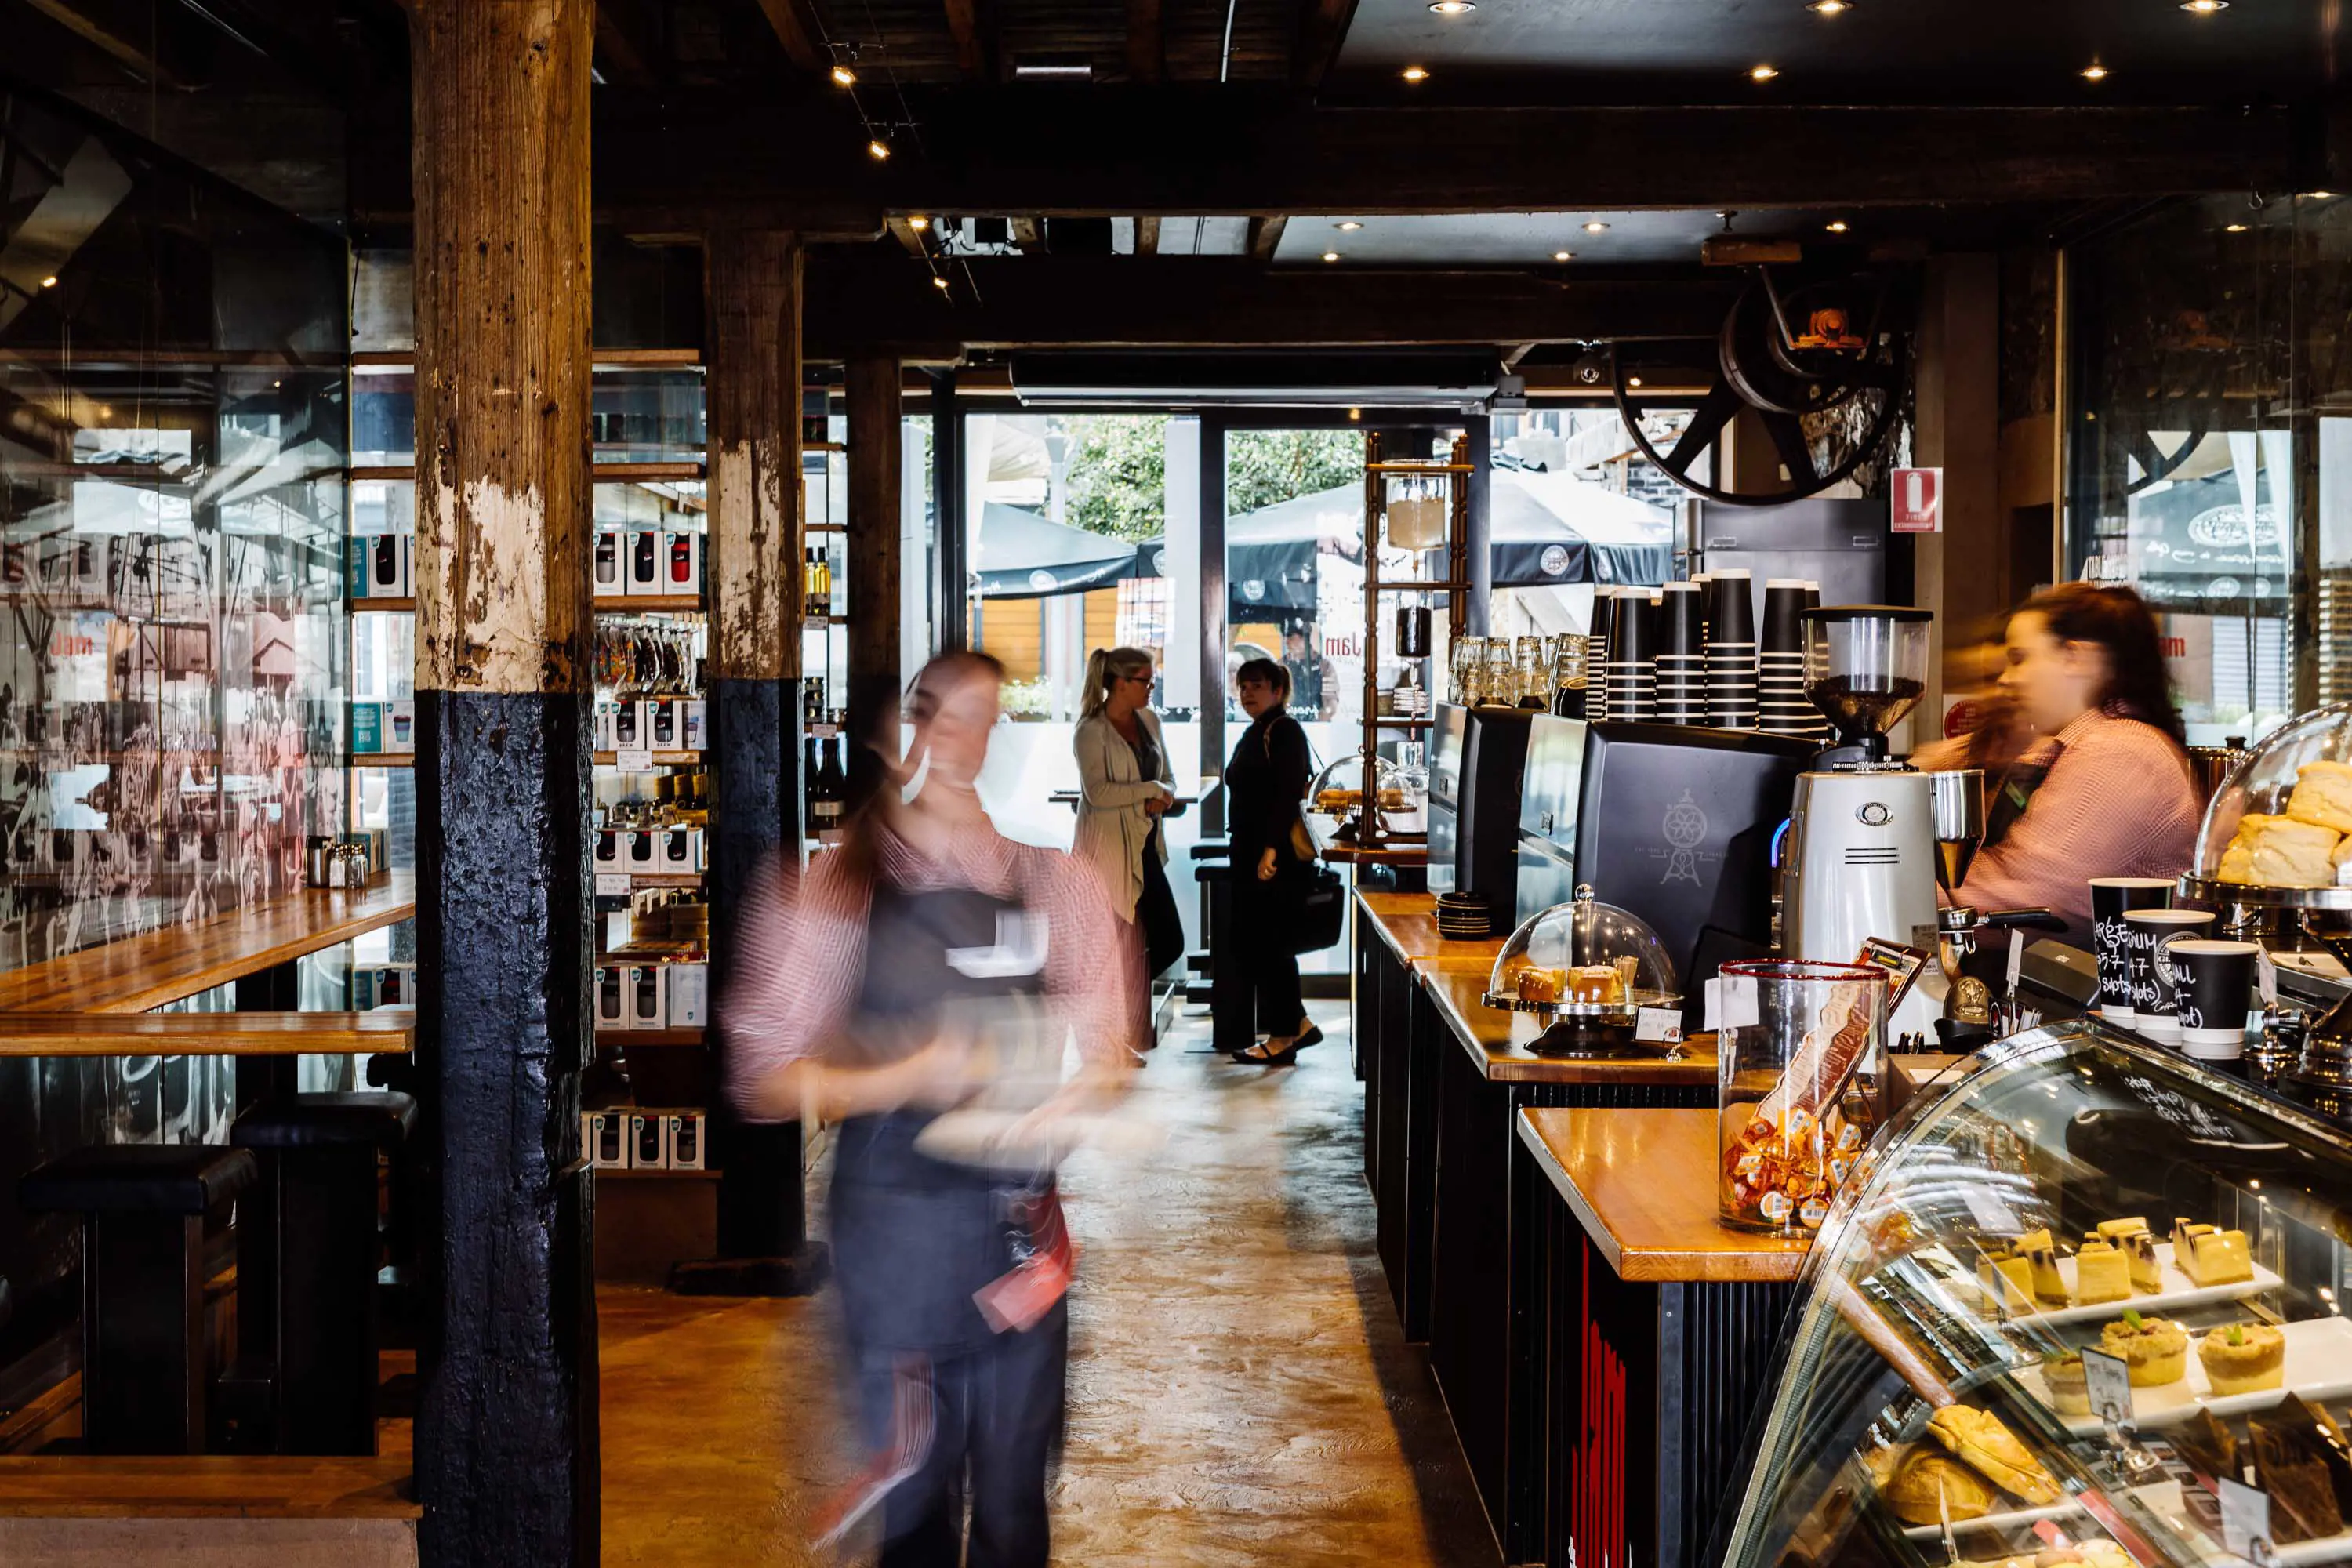 A cafe with glass cabinets and wooden beams is bustling with staff and customers.